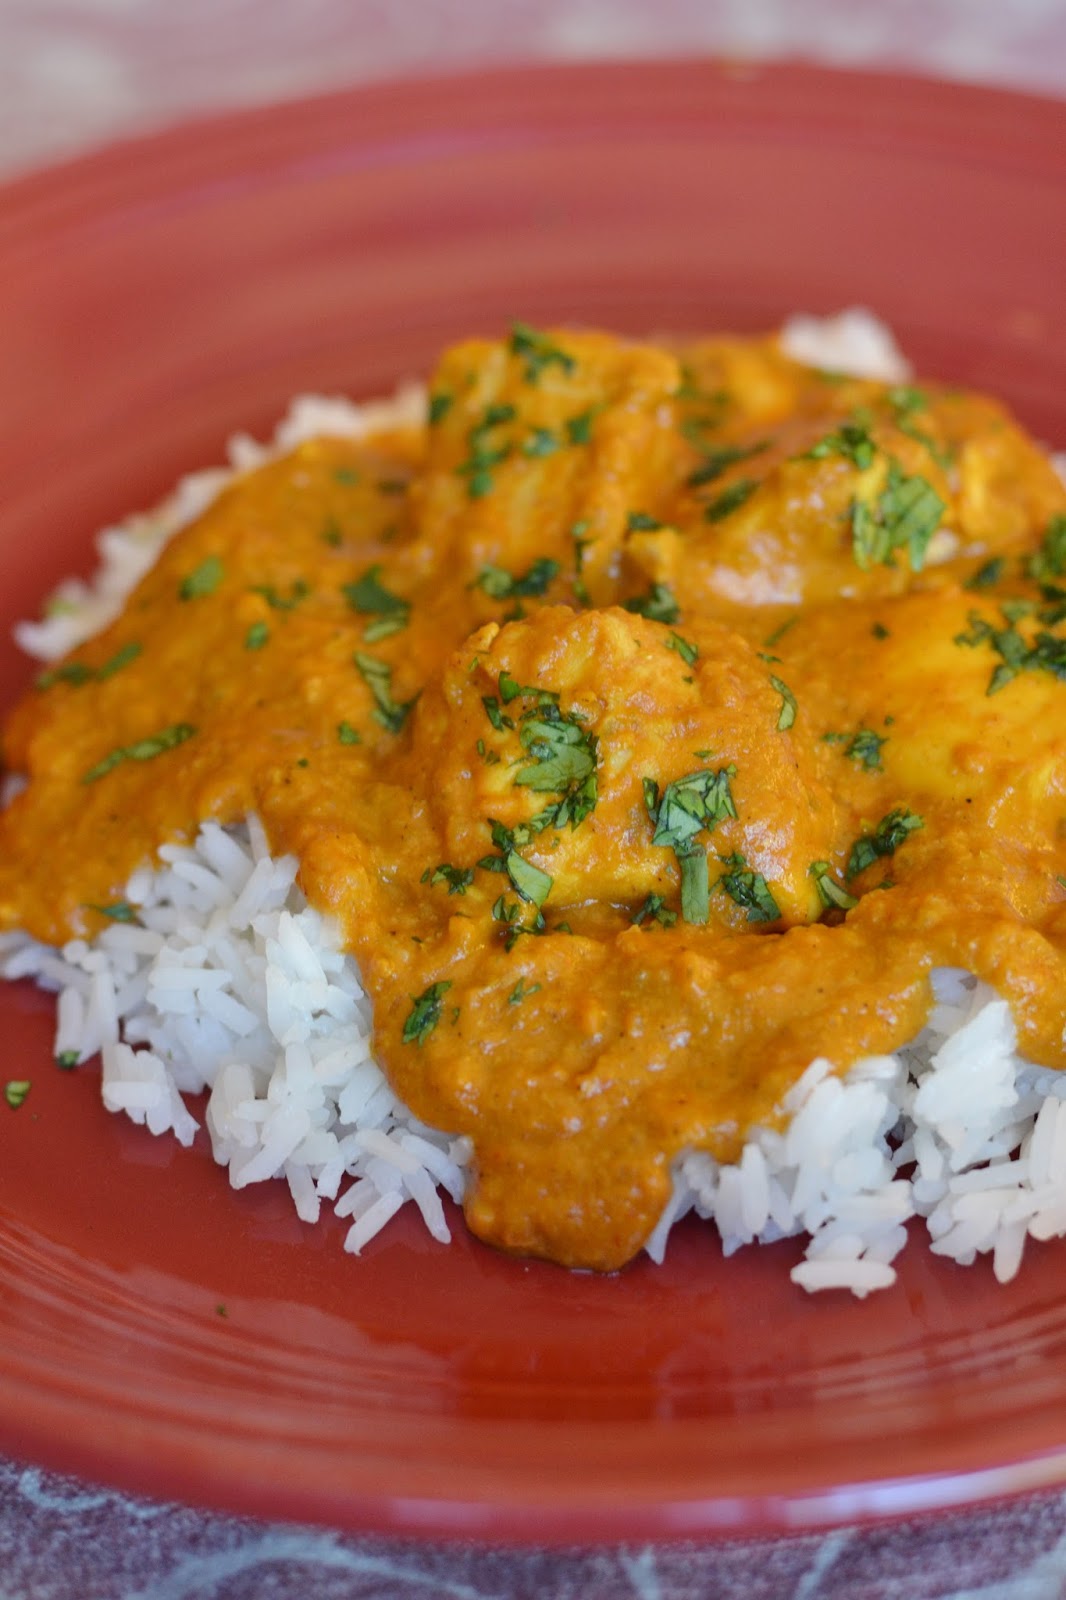 All things bright and beautiful: Crock pot chicken curry